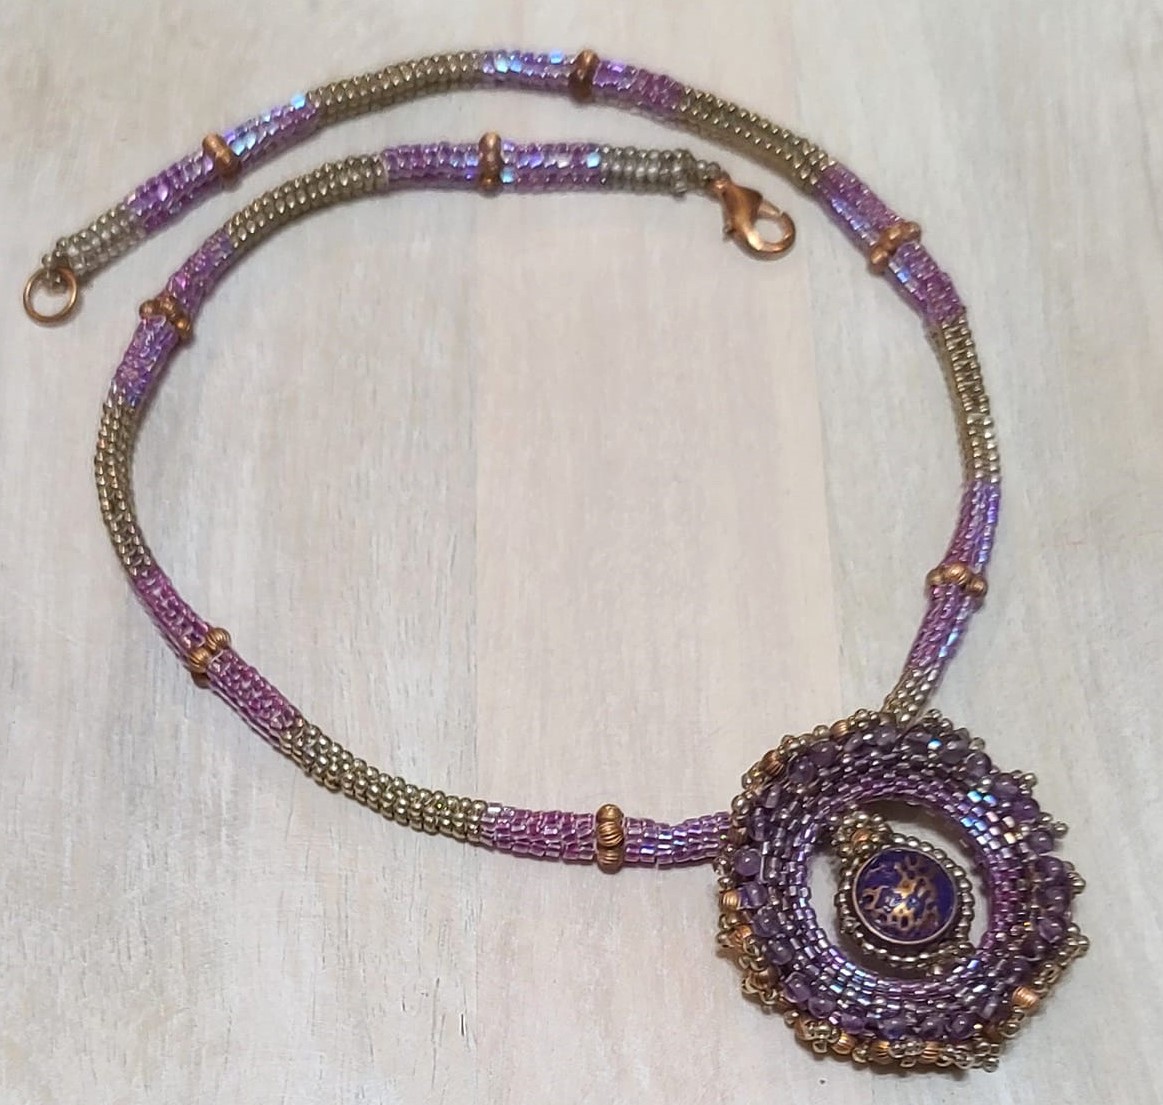 Beaded pendant purple and copper accents, peyote stitch rope